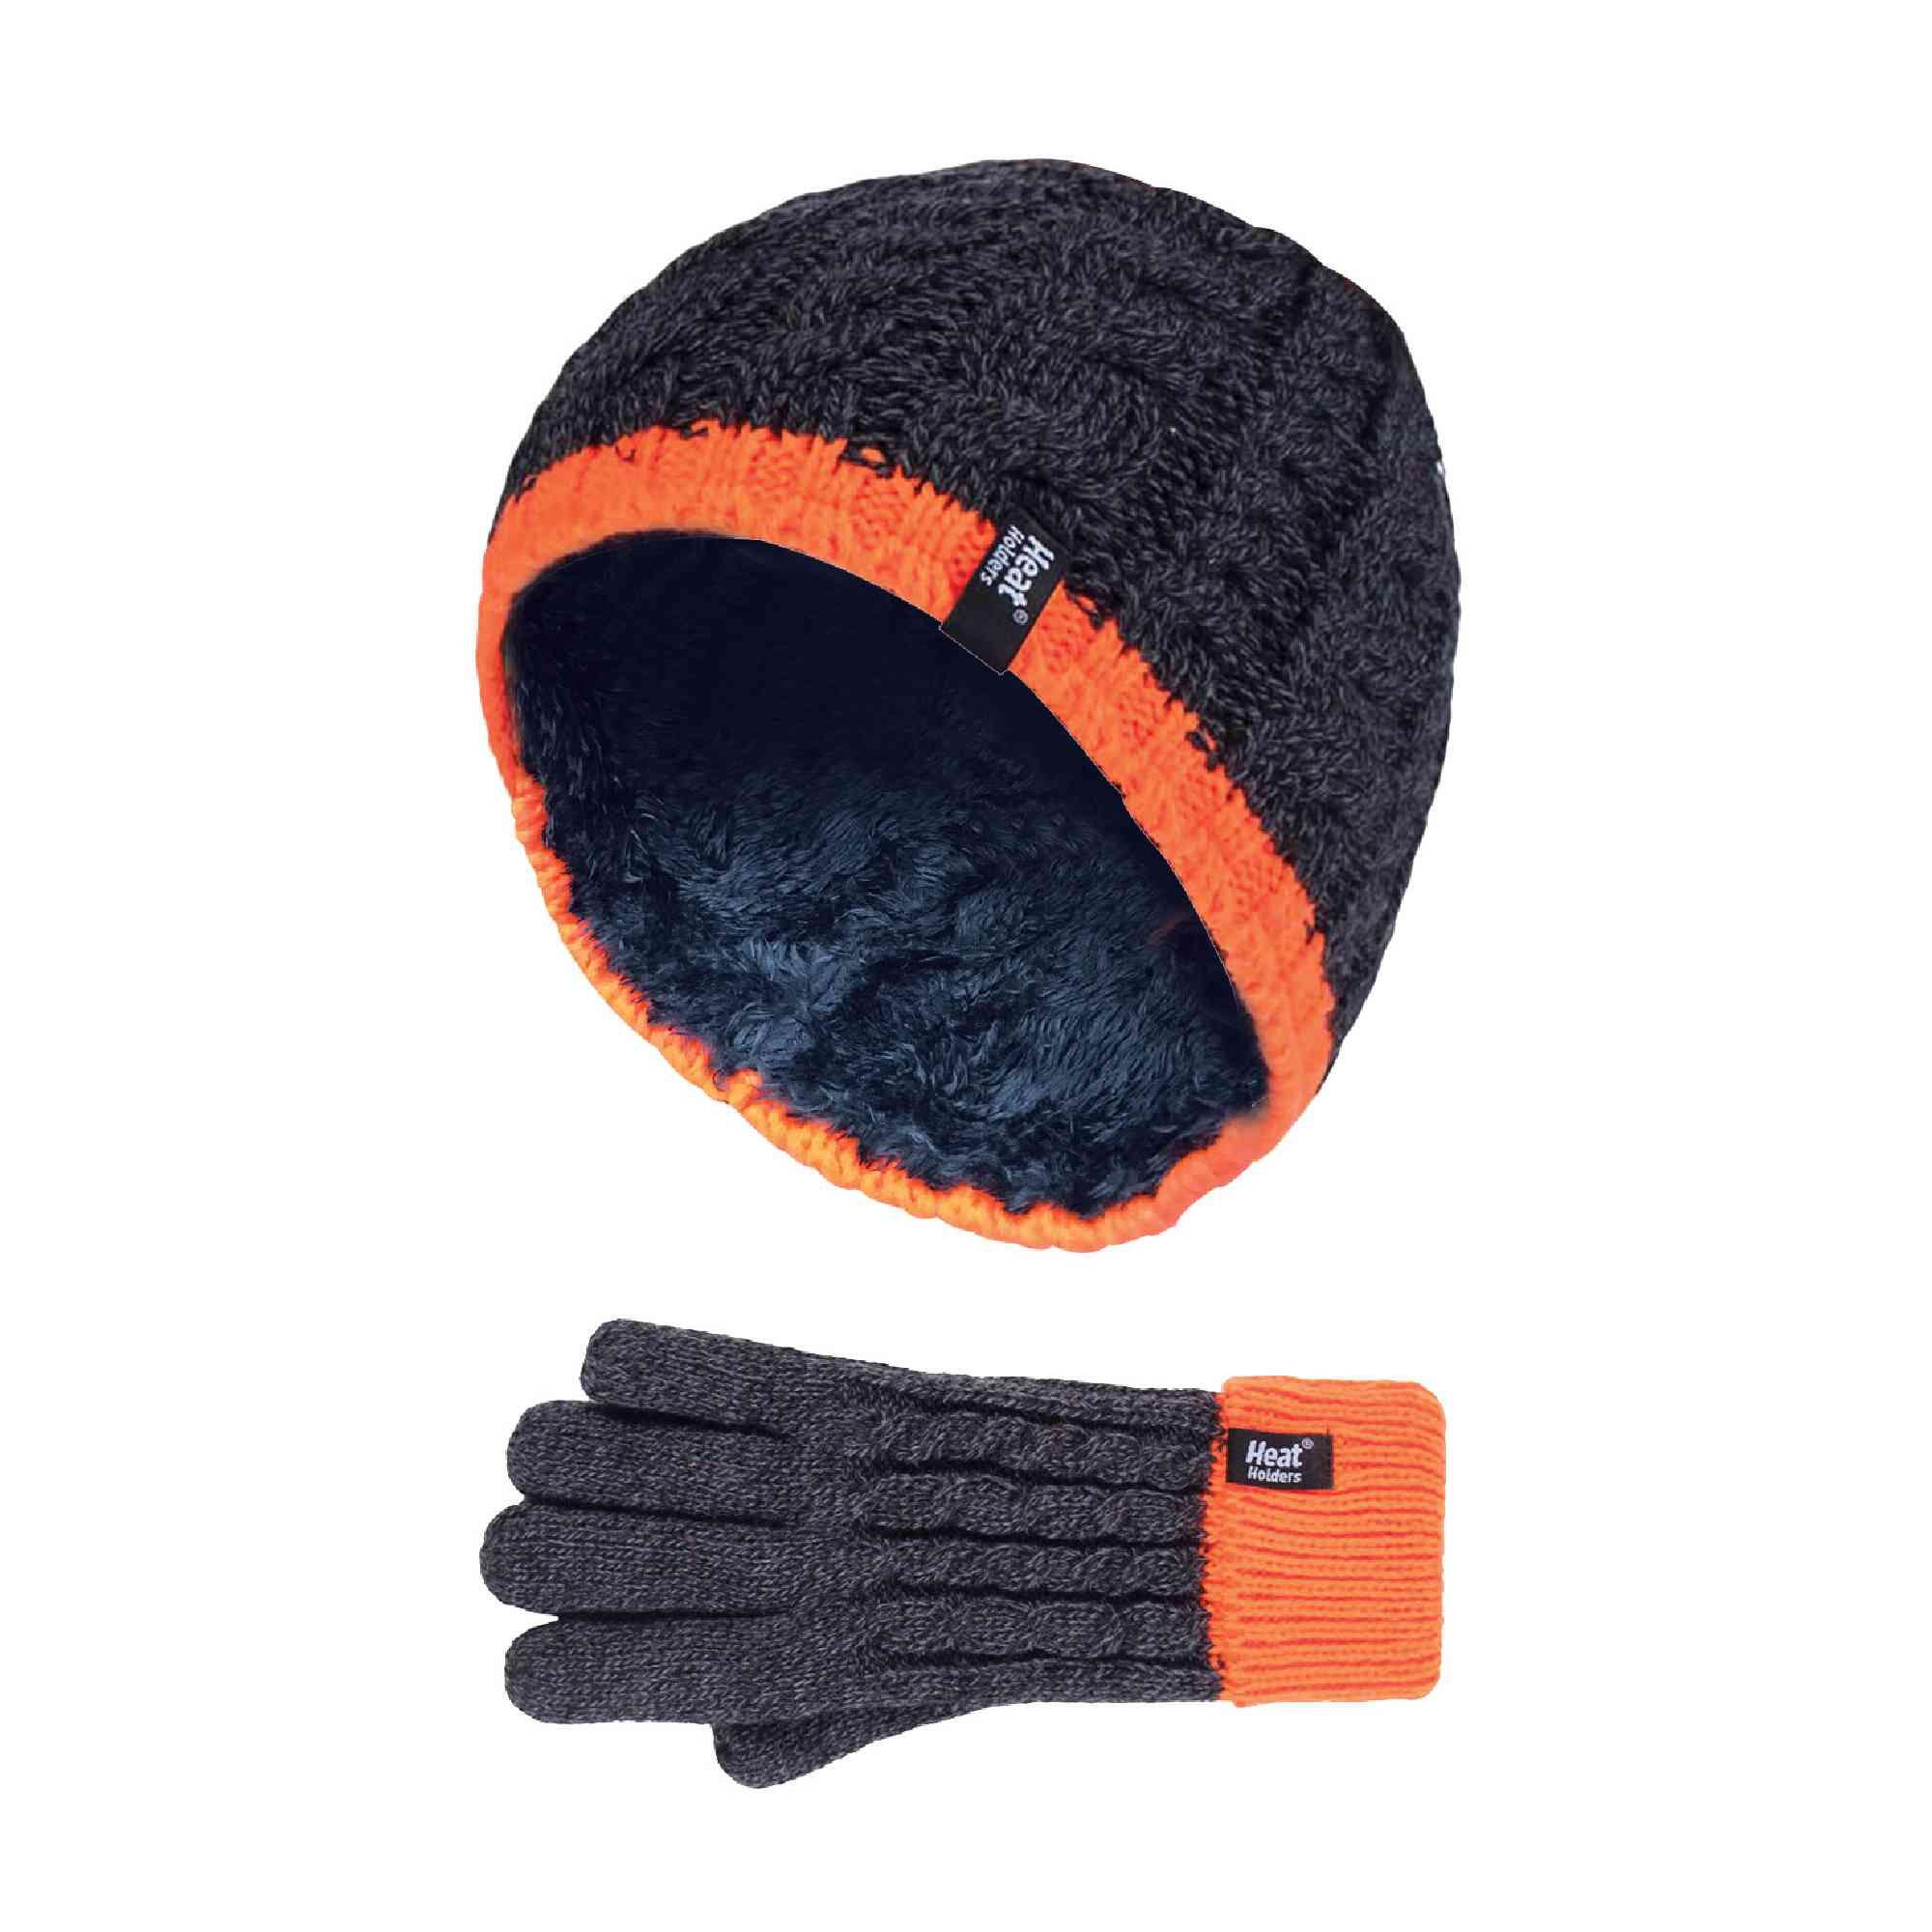 Boys Kids Cable Knit Warm Fleece Lined Thermal Winter Hat and Gloves Set 1/4